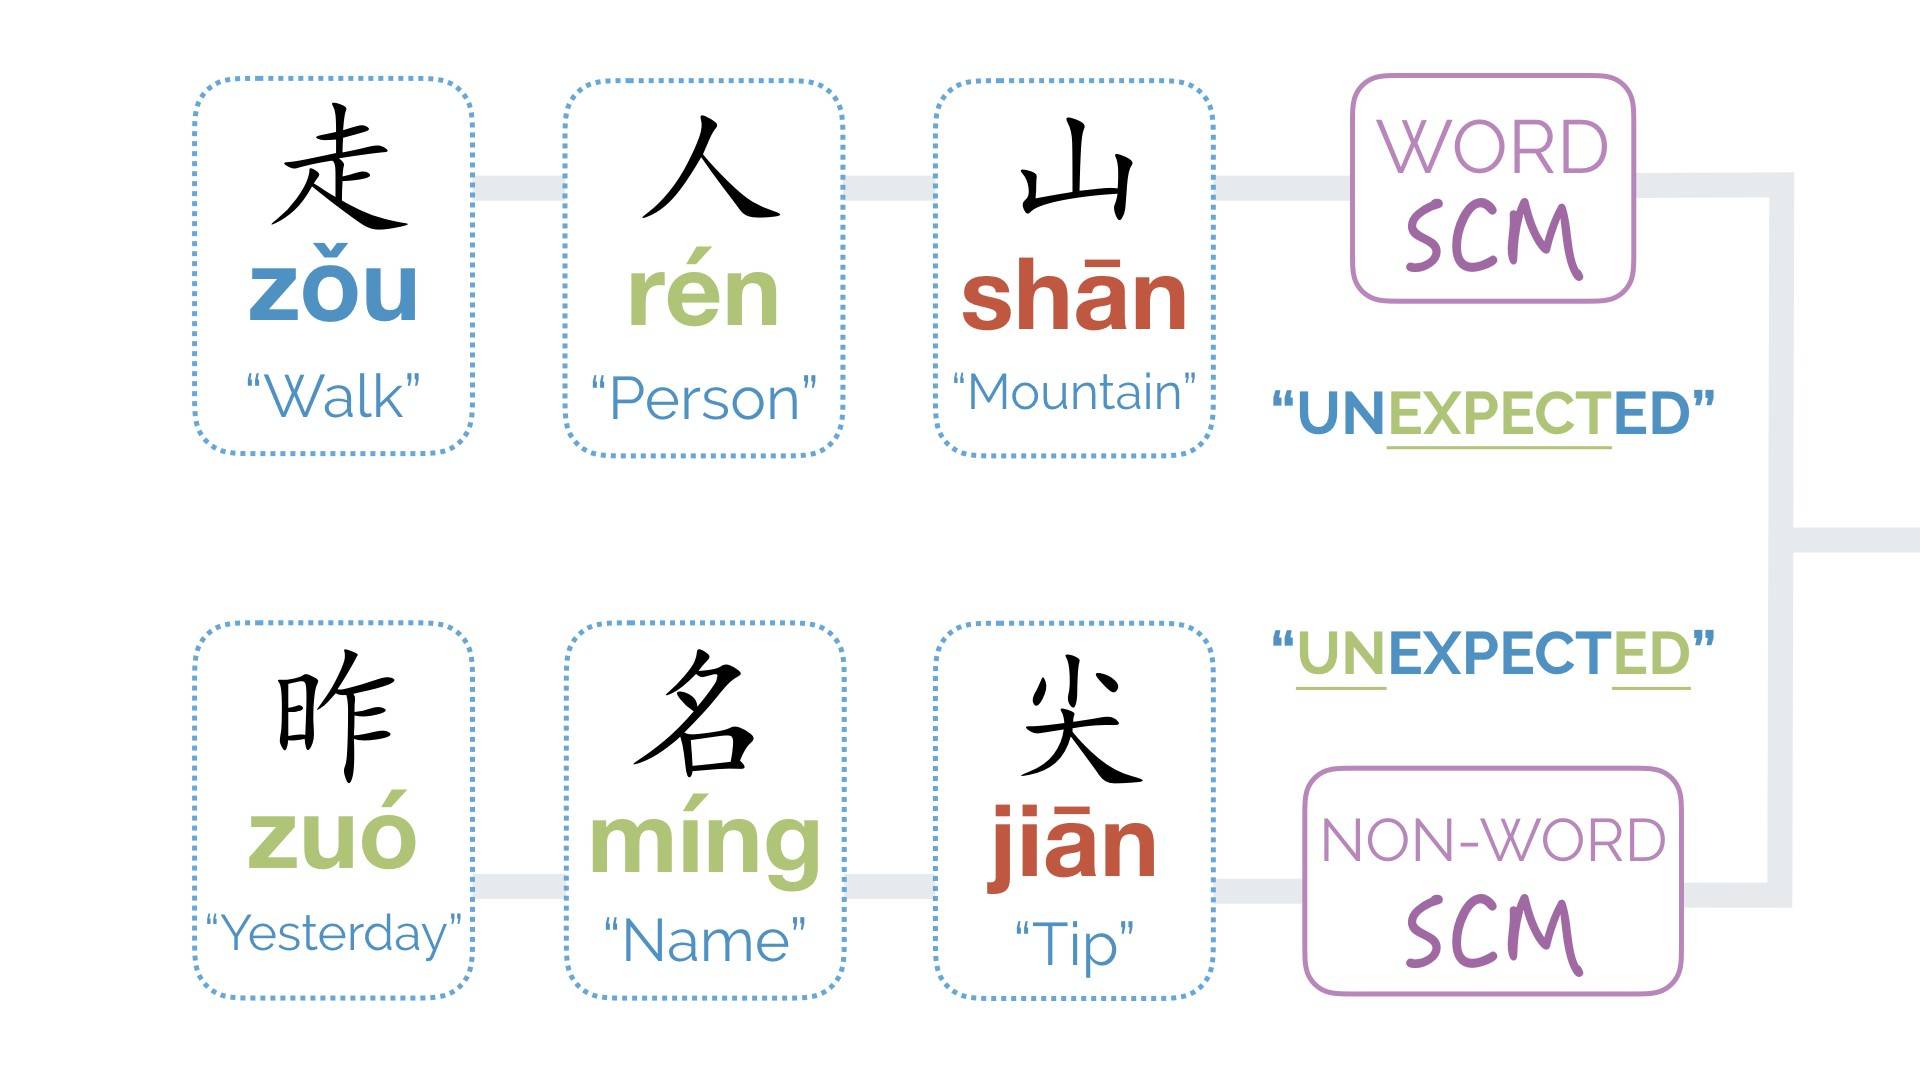 Are Chinese Characters Words, Are Chinese Characters Words or Letters?